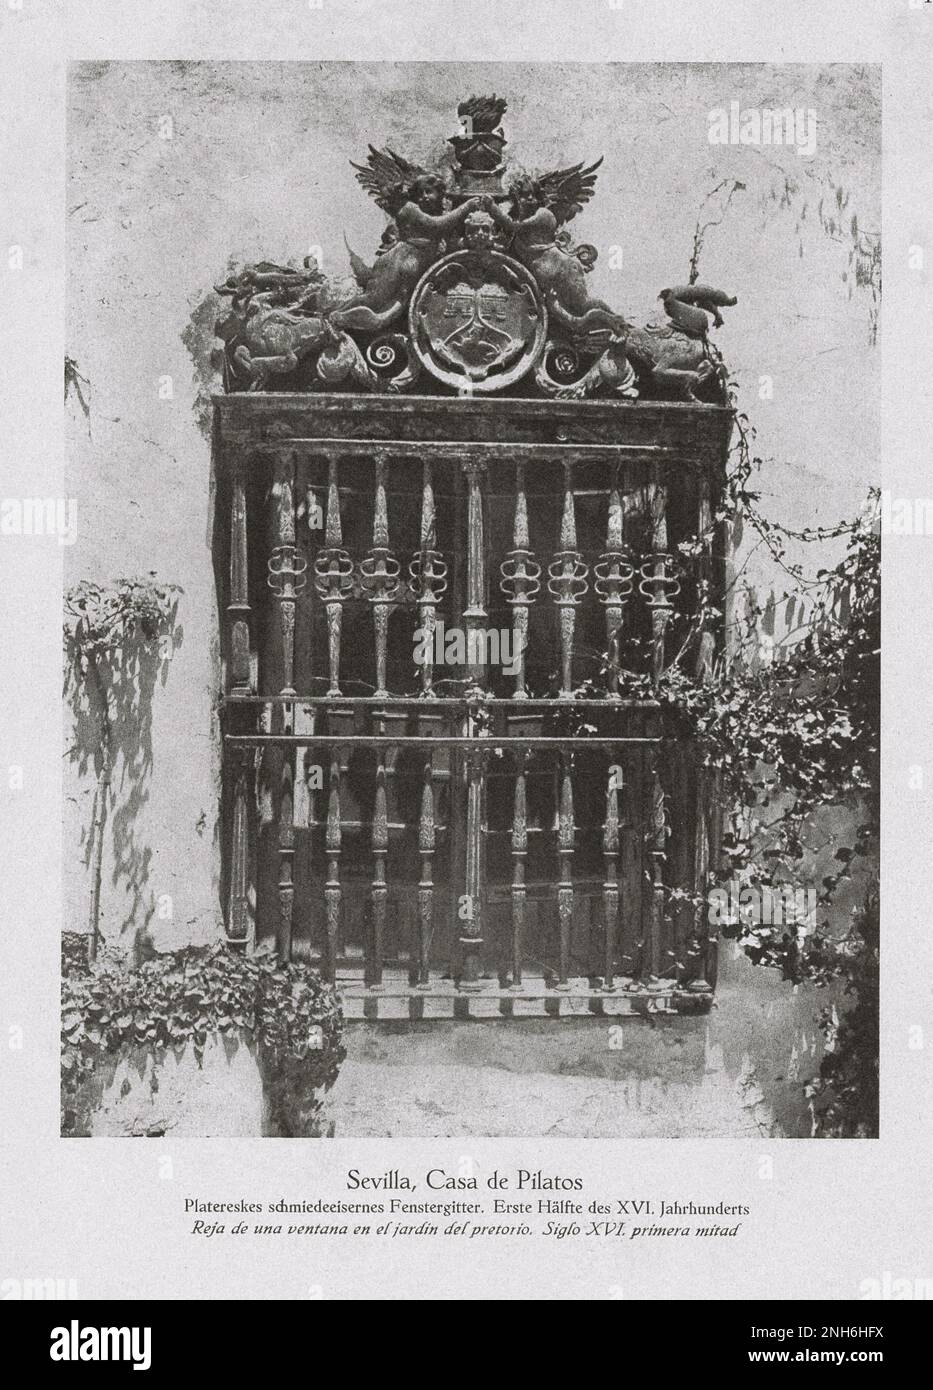 Architecture of Old Spain. Vintage photo of Casa de Pilatos (Pilate's House) in Seville.  An Andalusian palace in Seville, Spain, which serves as the permanent residence of the Dukes of Medinaceli. It is an example of an Italian Renaissance building with Mudéjar elements and decorations. Stock Photo